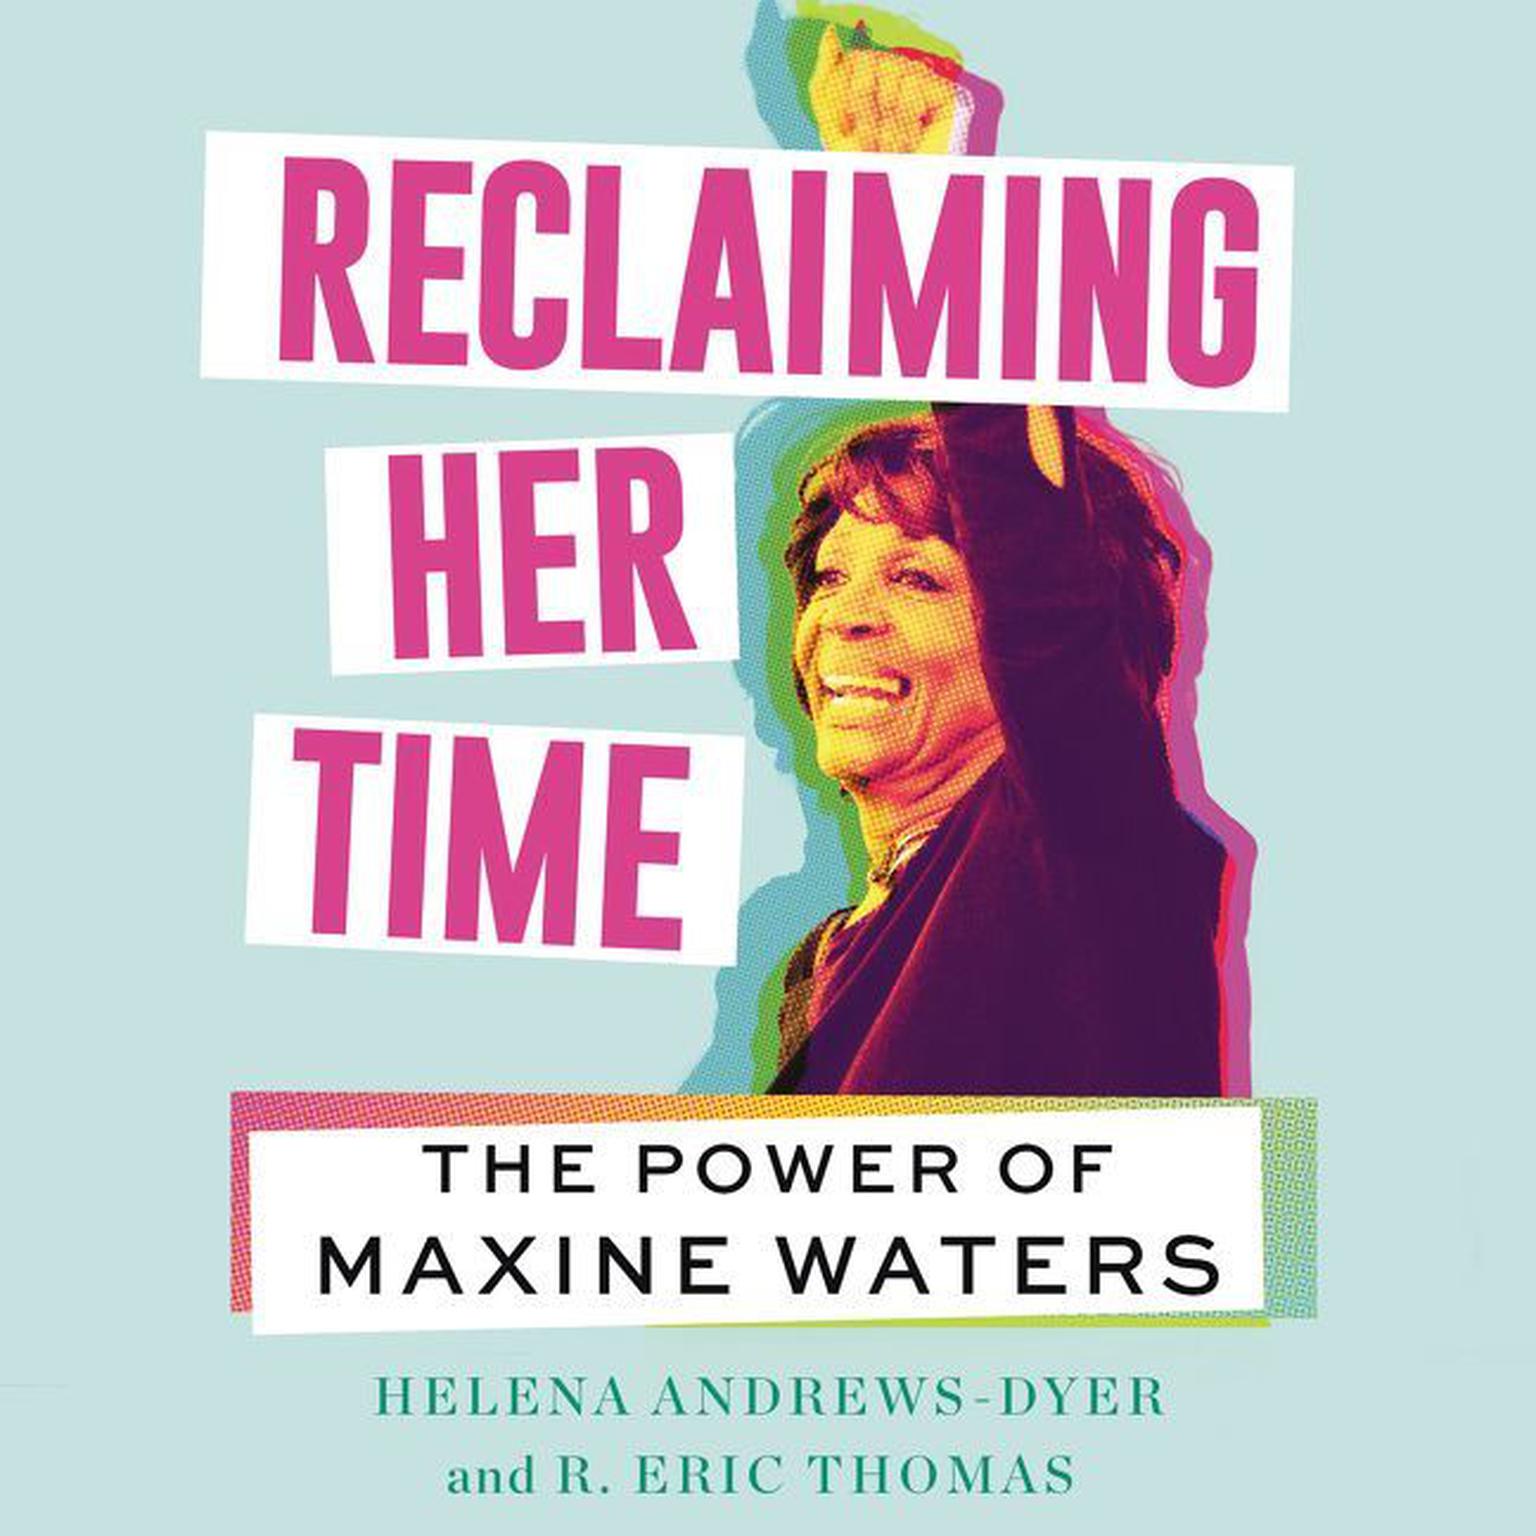 Reclaiming Her Time: The Power of Maxine Waters Audiobook, by Helena Andrews-Dyer